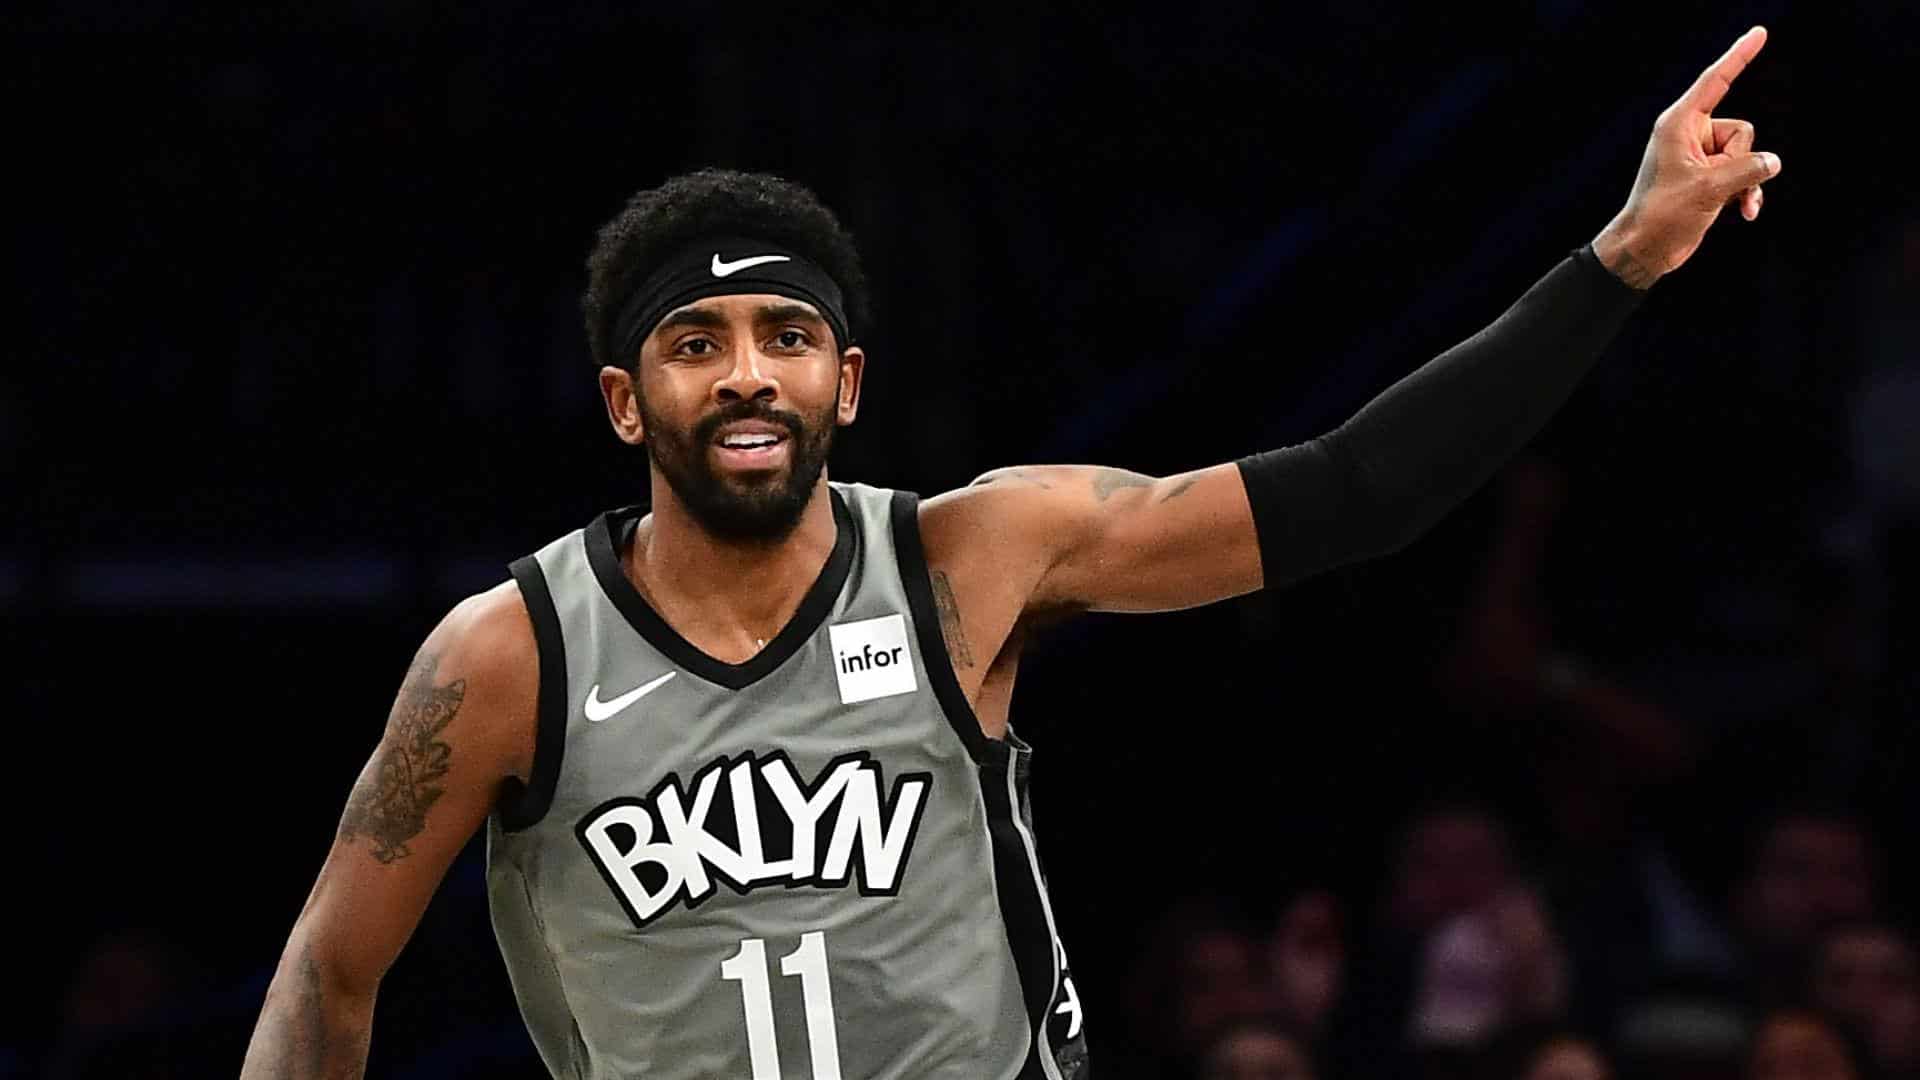 Kyrie Irving Re-sign nets deal NBA